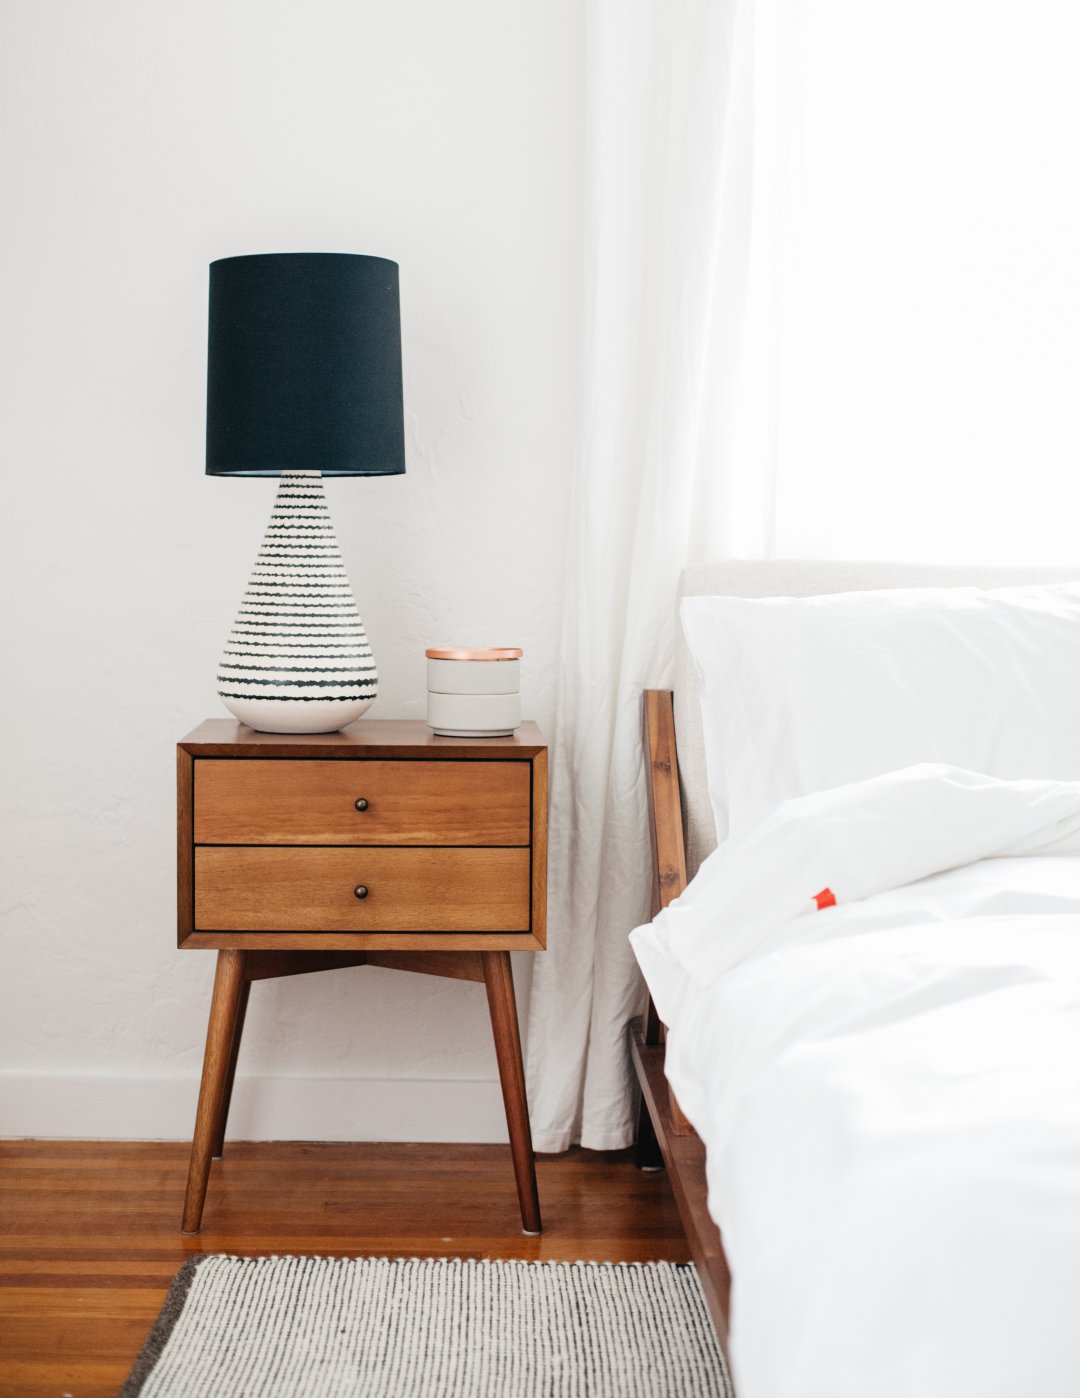 California Cool: Commune's New Collection for West Elm - Remodelista